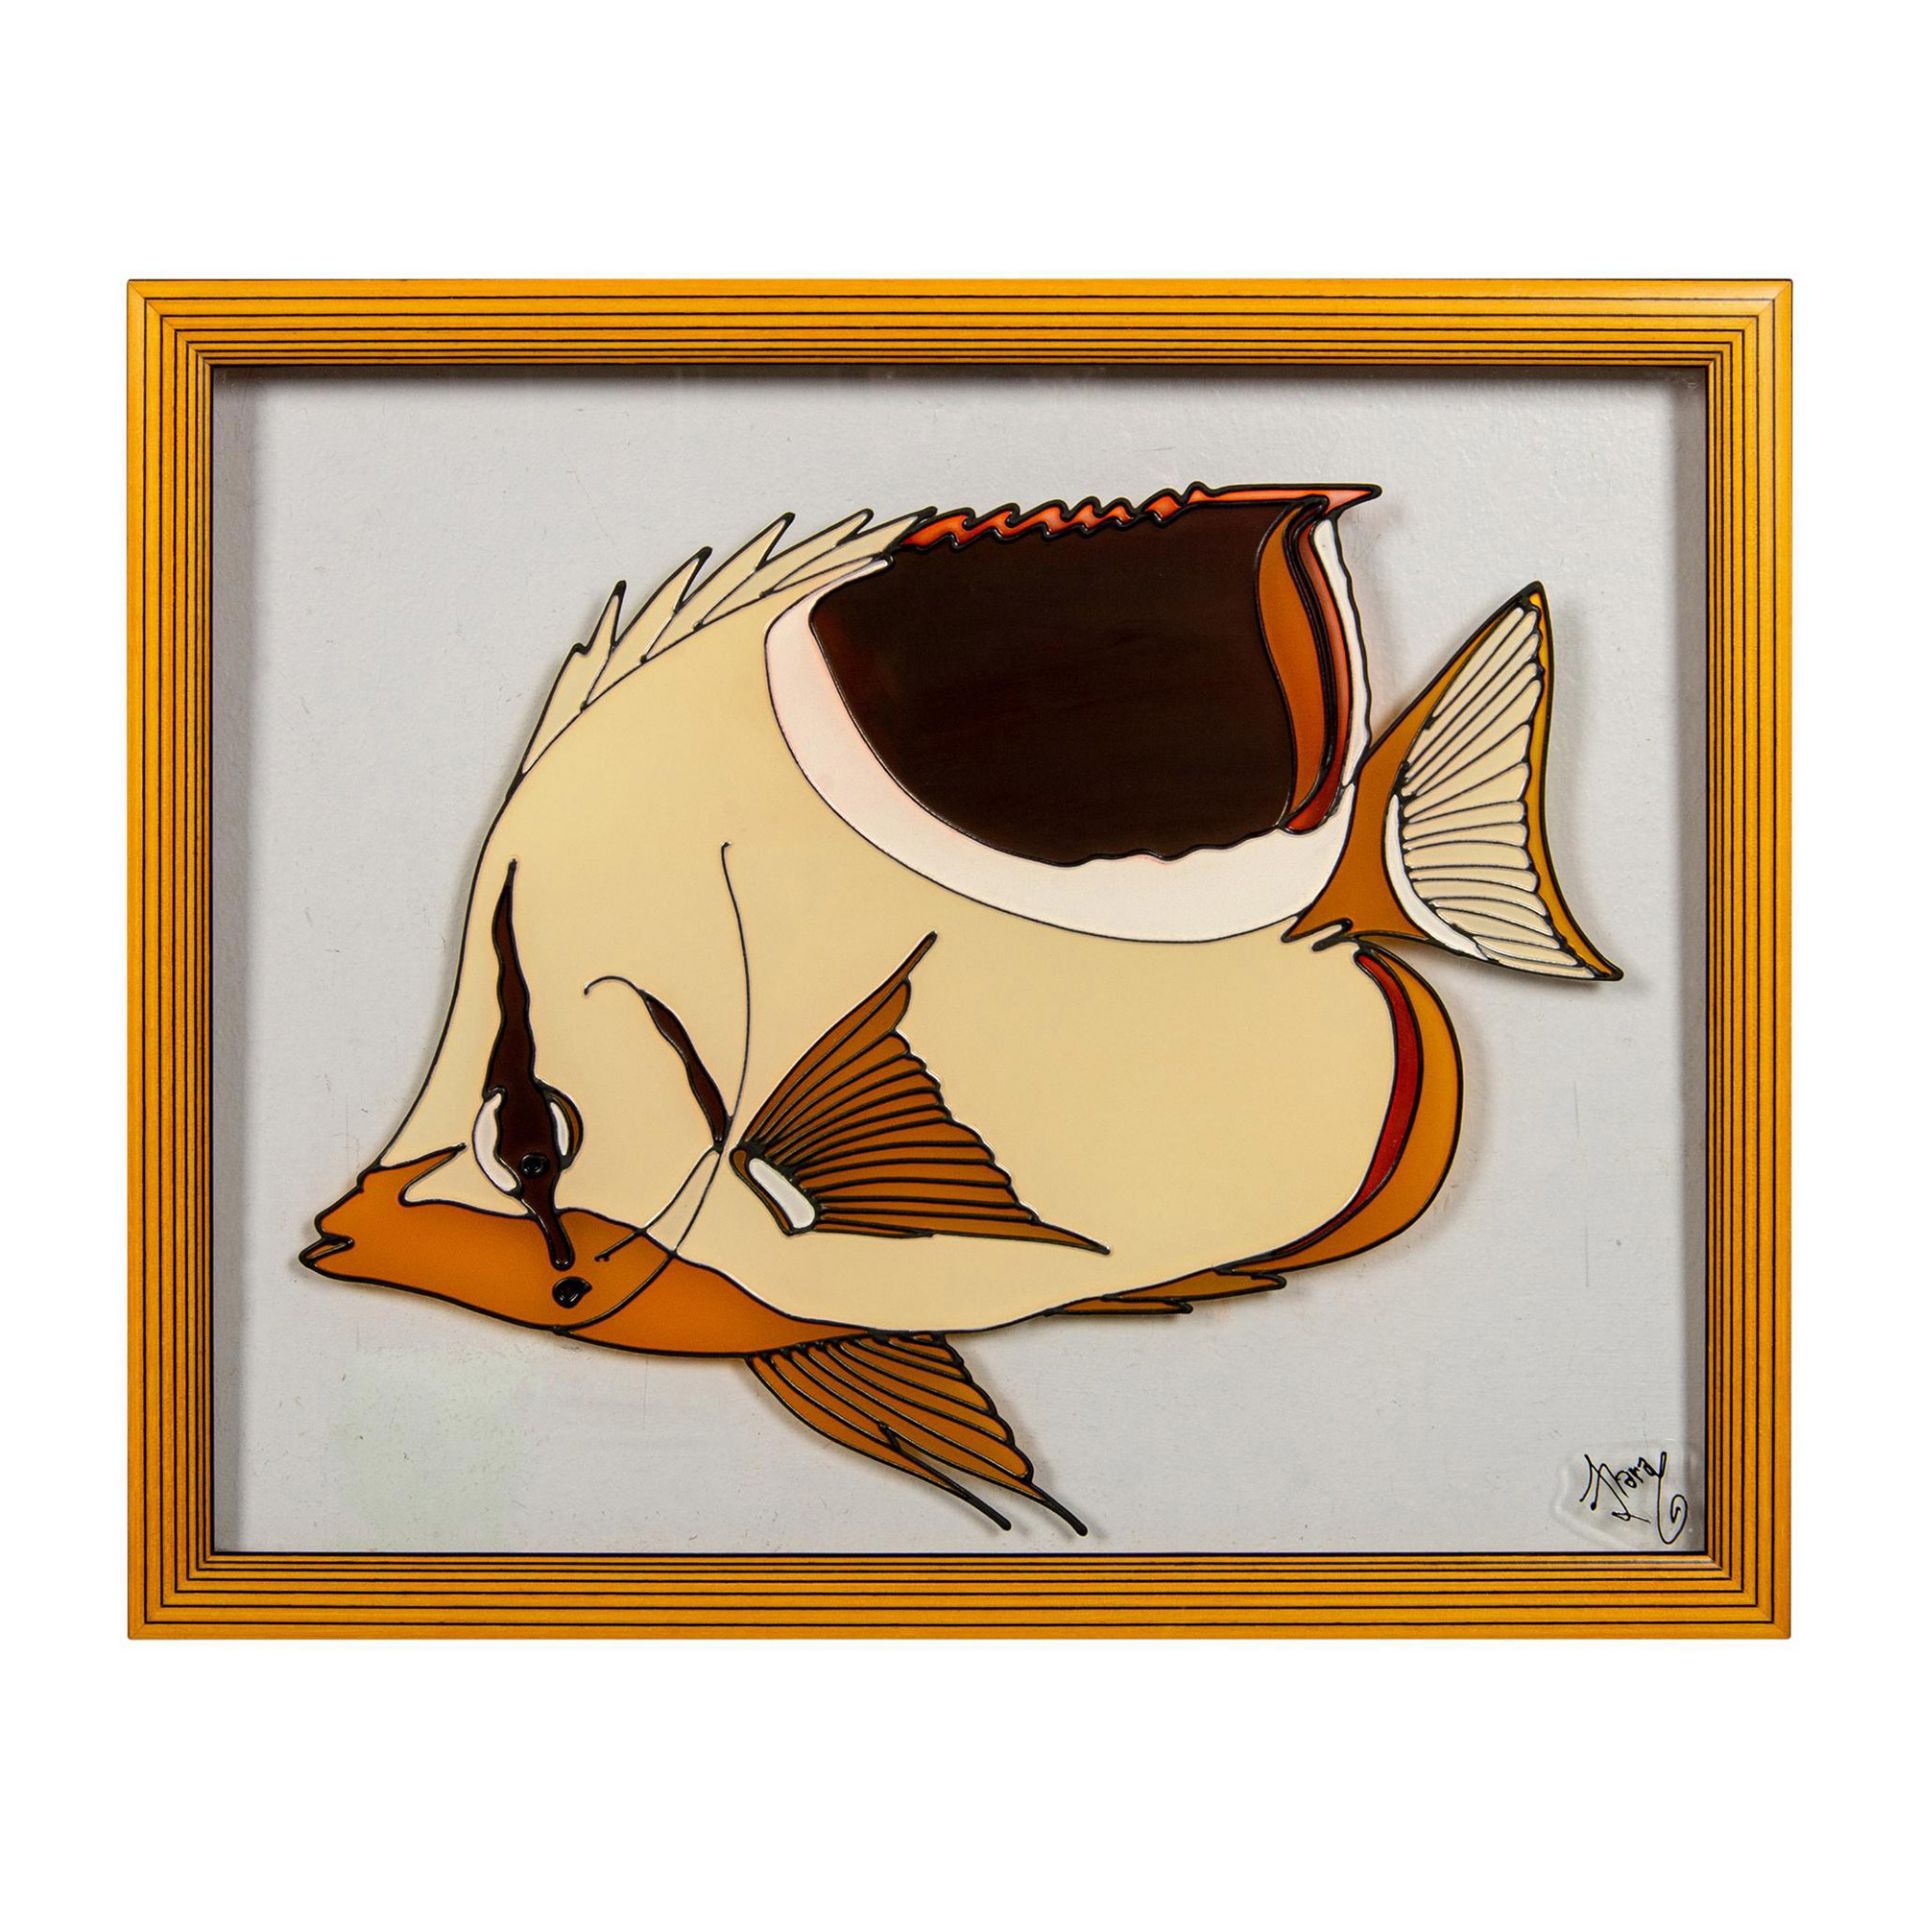 Framed Stained and Painted Glass Art, Tropical Fish, Signed - Image 3 of 6